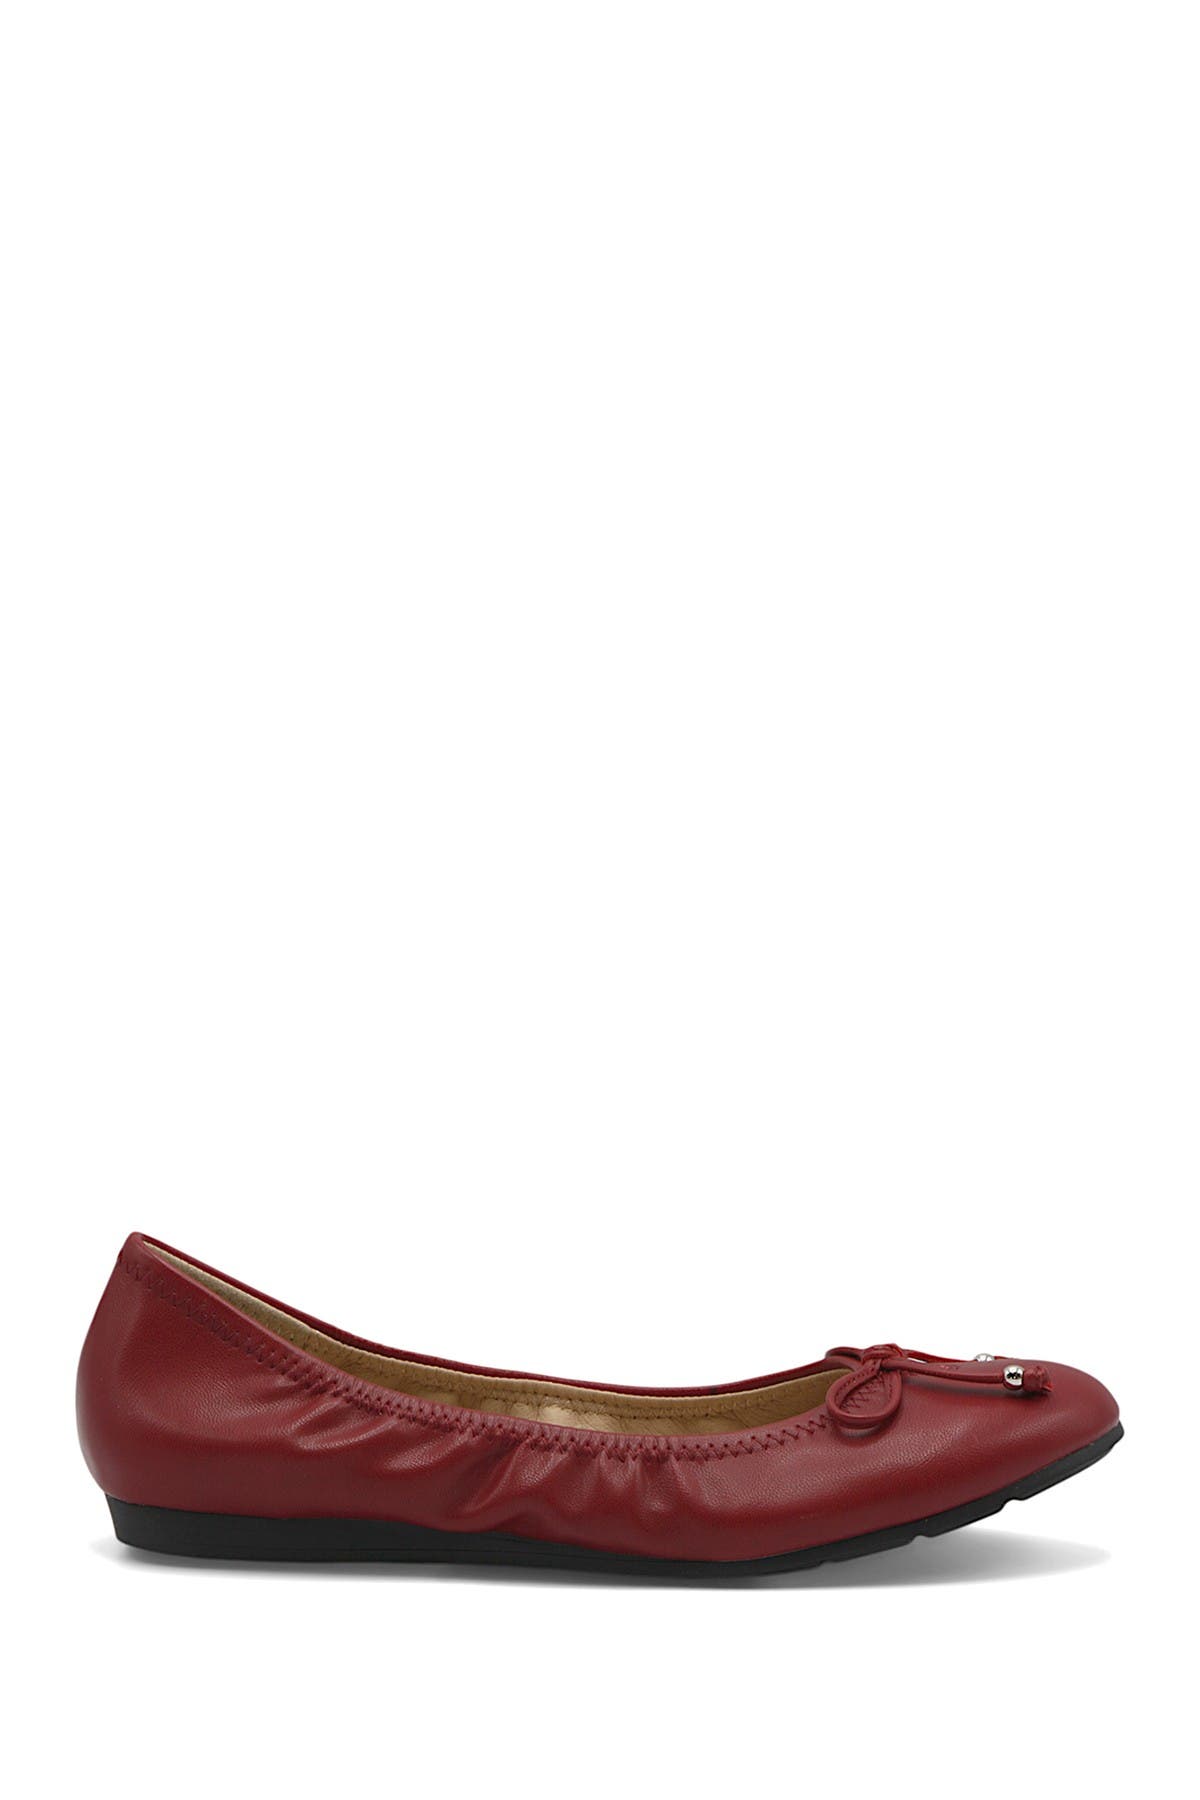 Mootsies Tootsies Cameo Ballet Flat In Red-fl